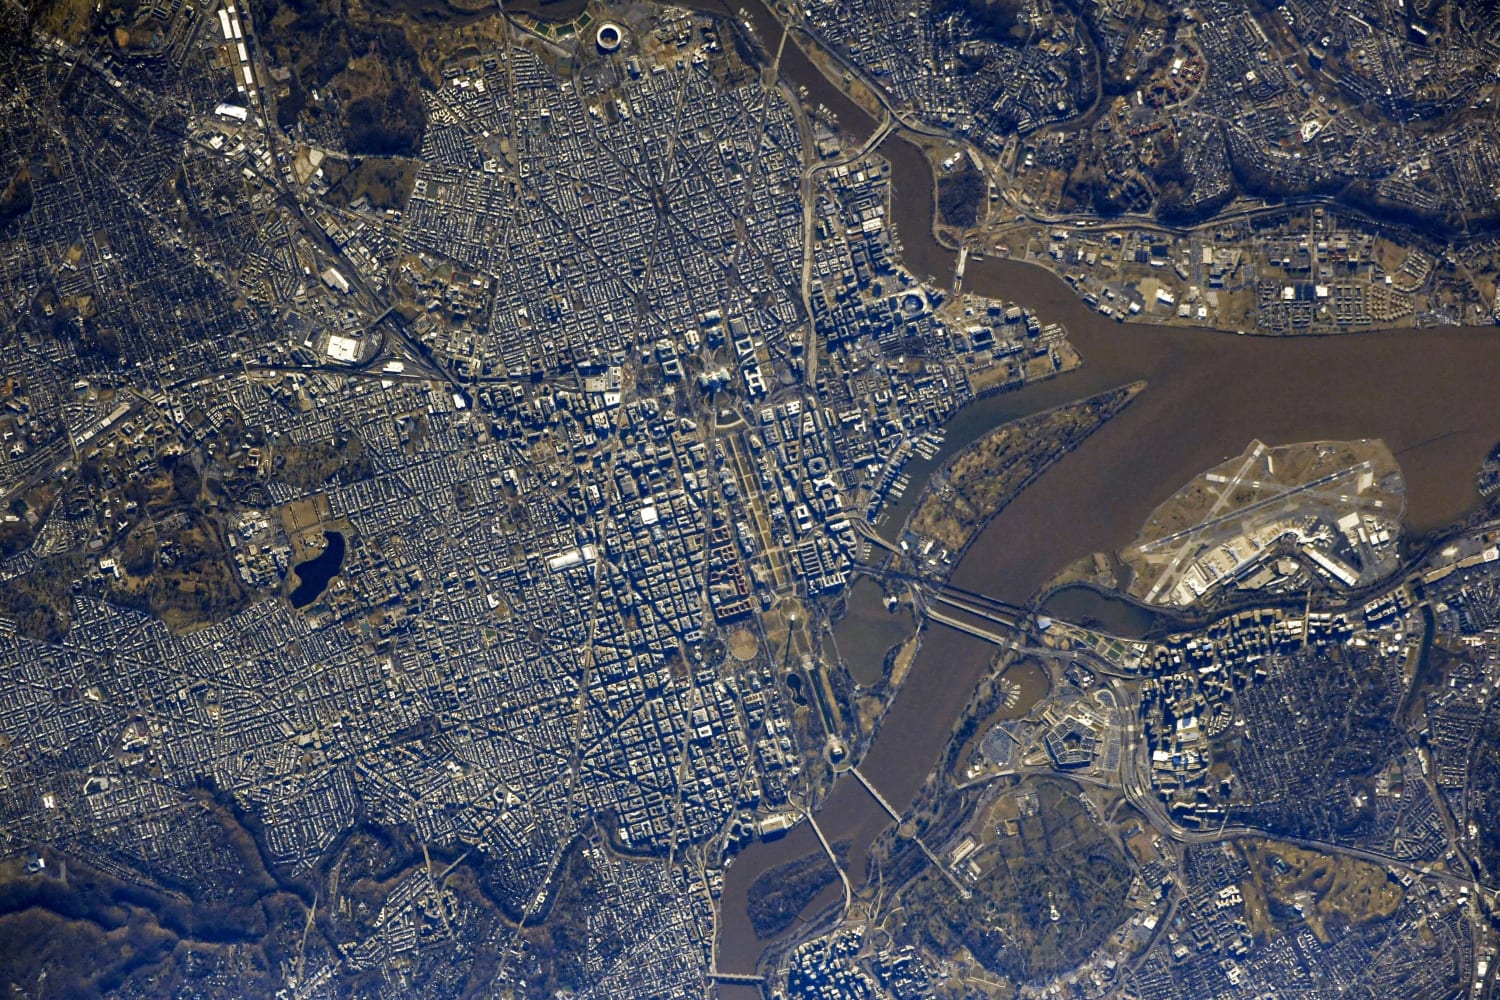 Washington, District of Columbia, United States of America, photographed on 3 March 2021 from the International Space Station. Photo credit: Roscosmos, Russian Federation [OS]